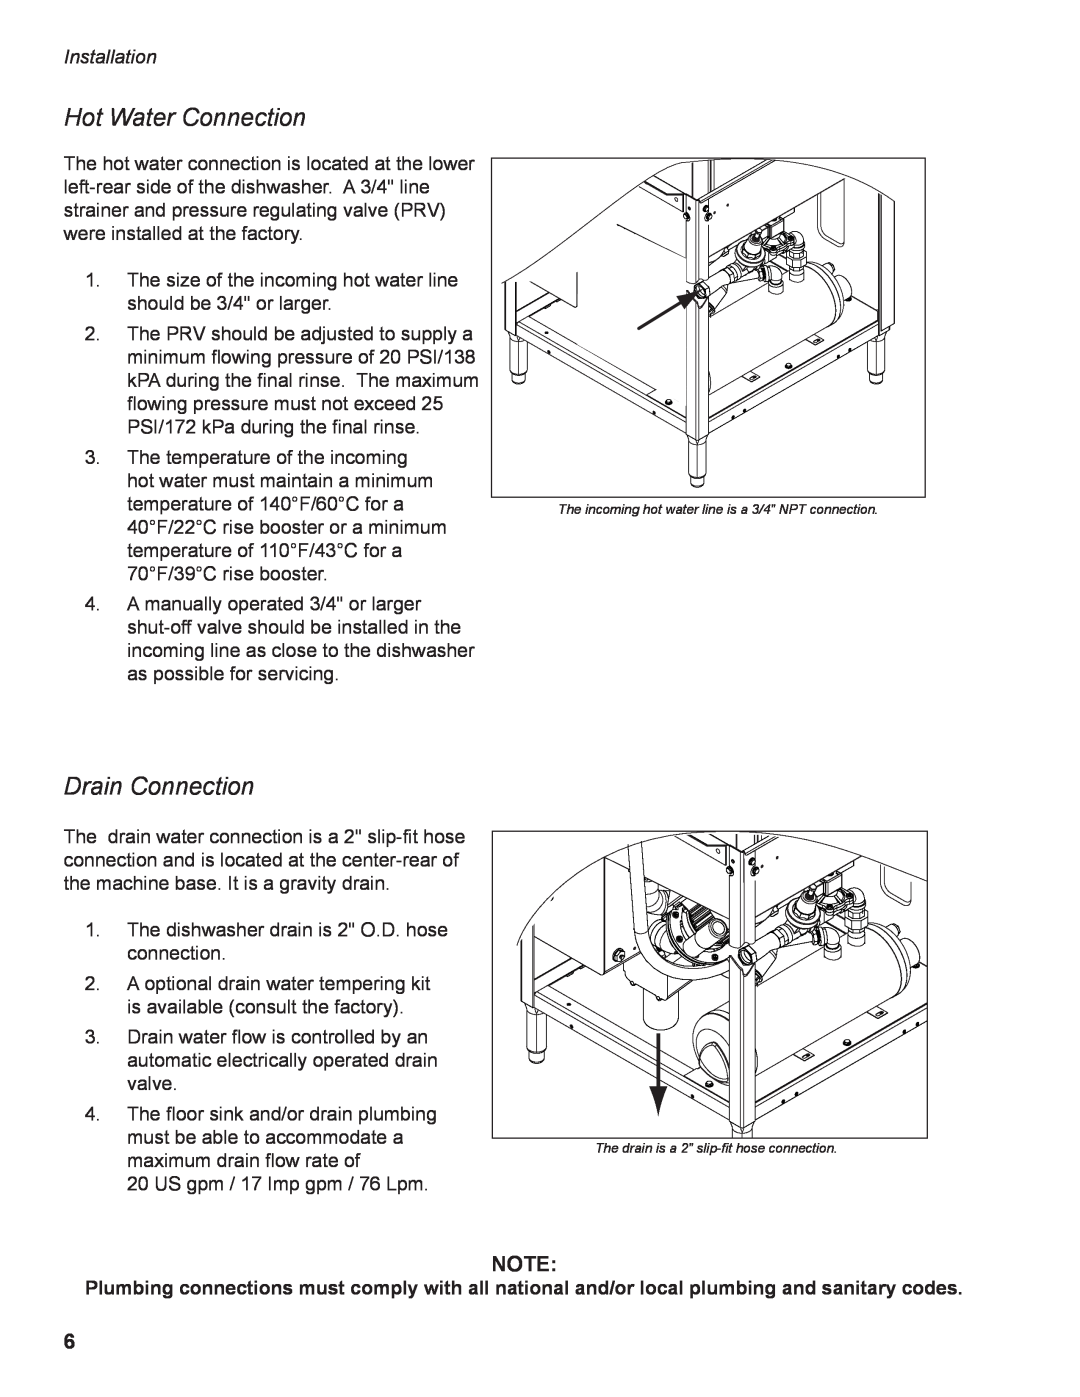 GE DH2000 operation manual Hot Water Connection, Drain Connection, Installation 